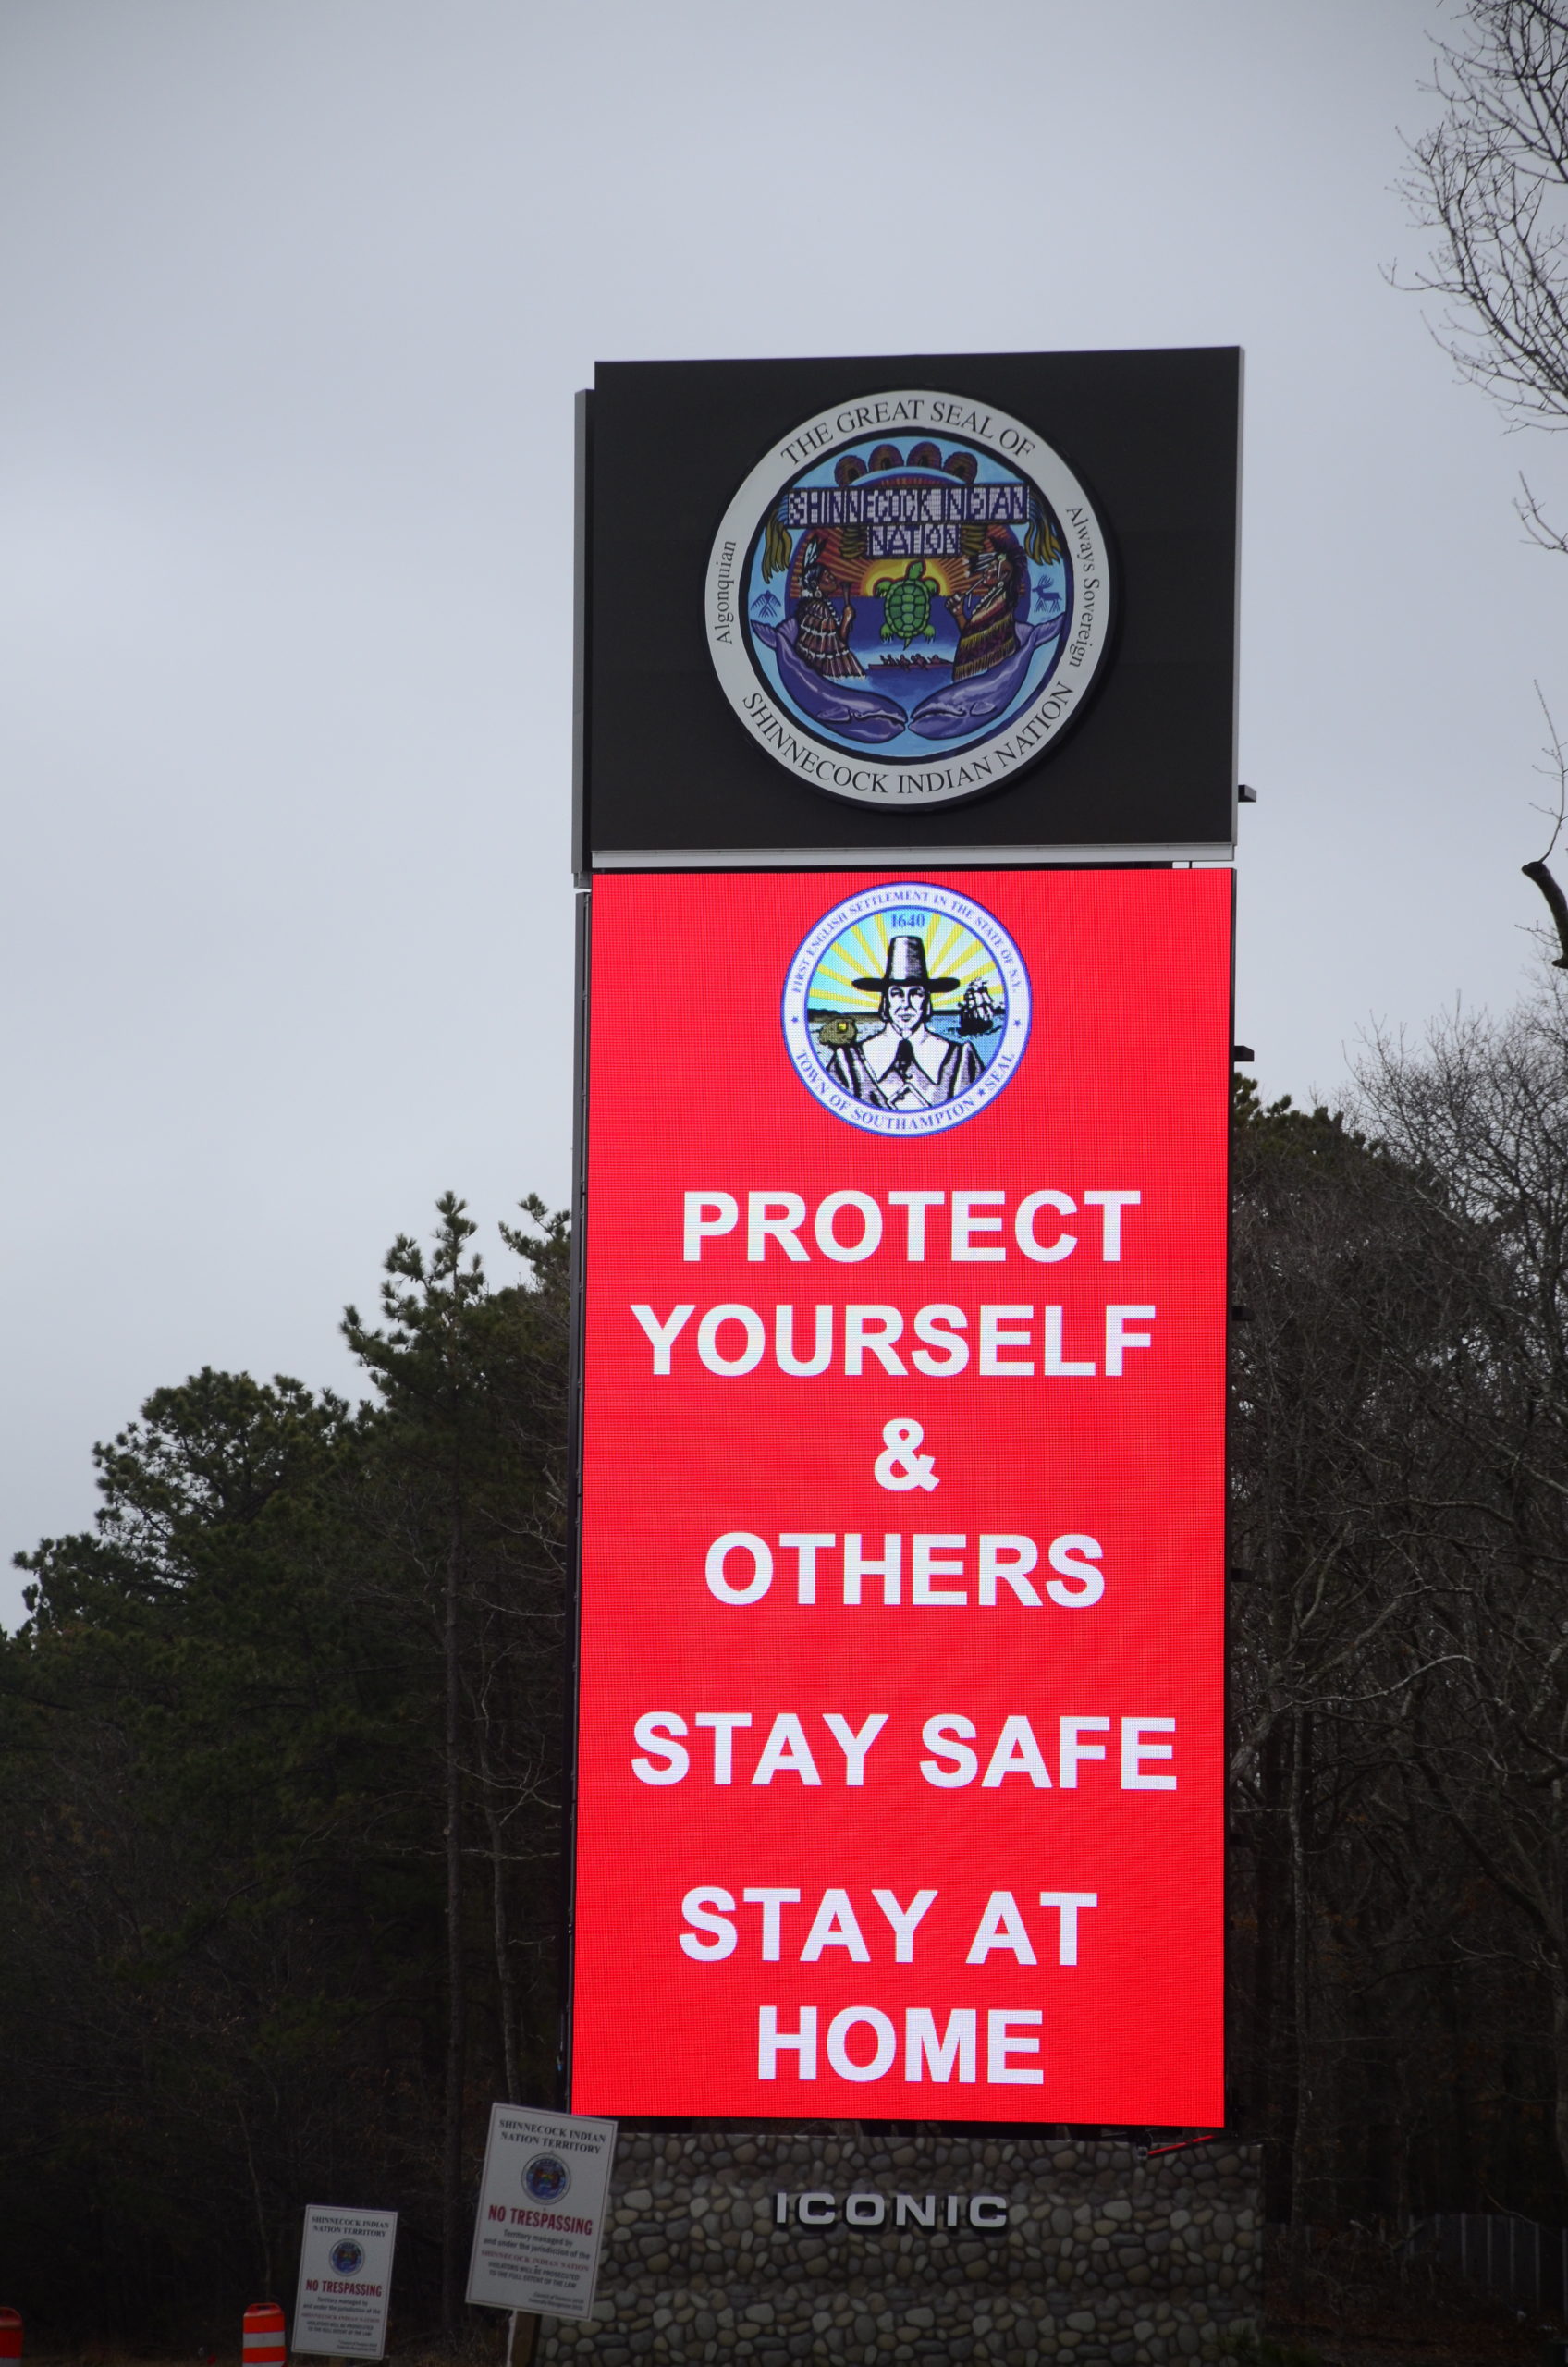 Southampton Town began posting public service announcements on the Shinnecock Nation's sign on Sunrise Highway to keep people informed about the COVID-19 outbreak. GREG WEHNER